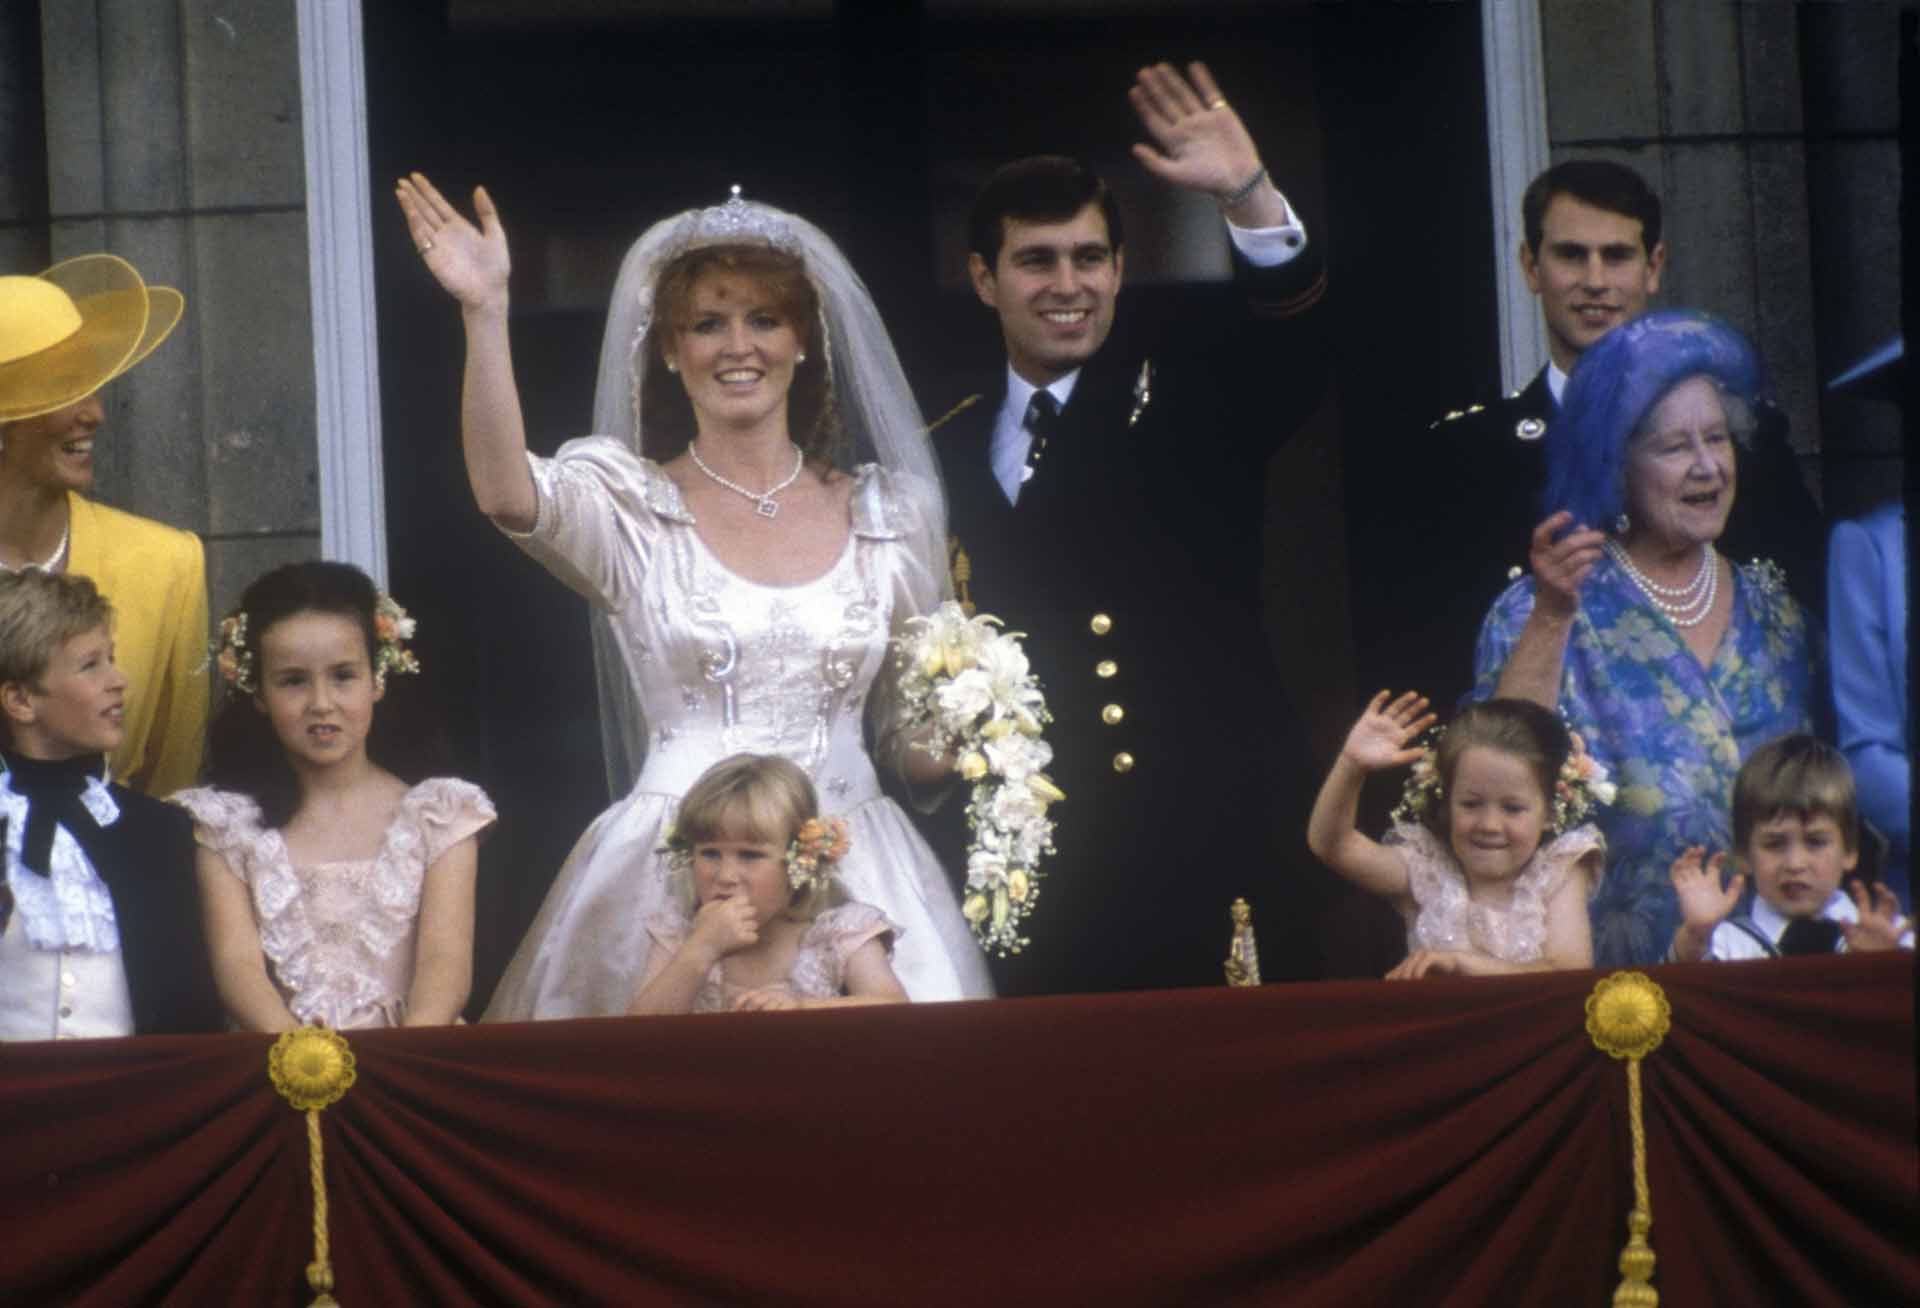 Prince Andrew and Sarah Ferguson during their wedding in London, July 23, 1986.  At left is the prince’s brother and best man Prince Edward, and the Queen Mother.  Front right is Prince William of Wales. Front second from left is bridesmaid Zara Phillips.